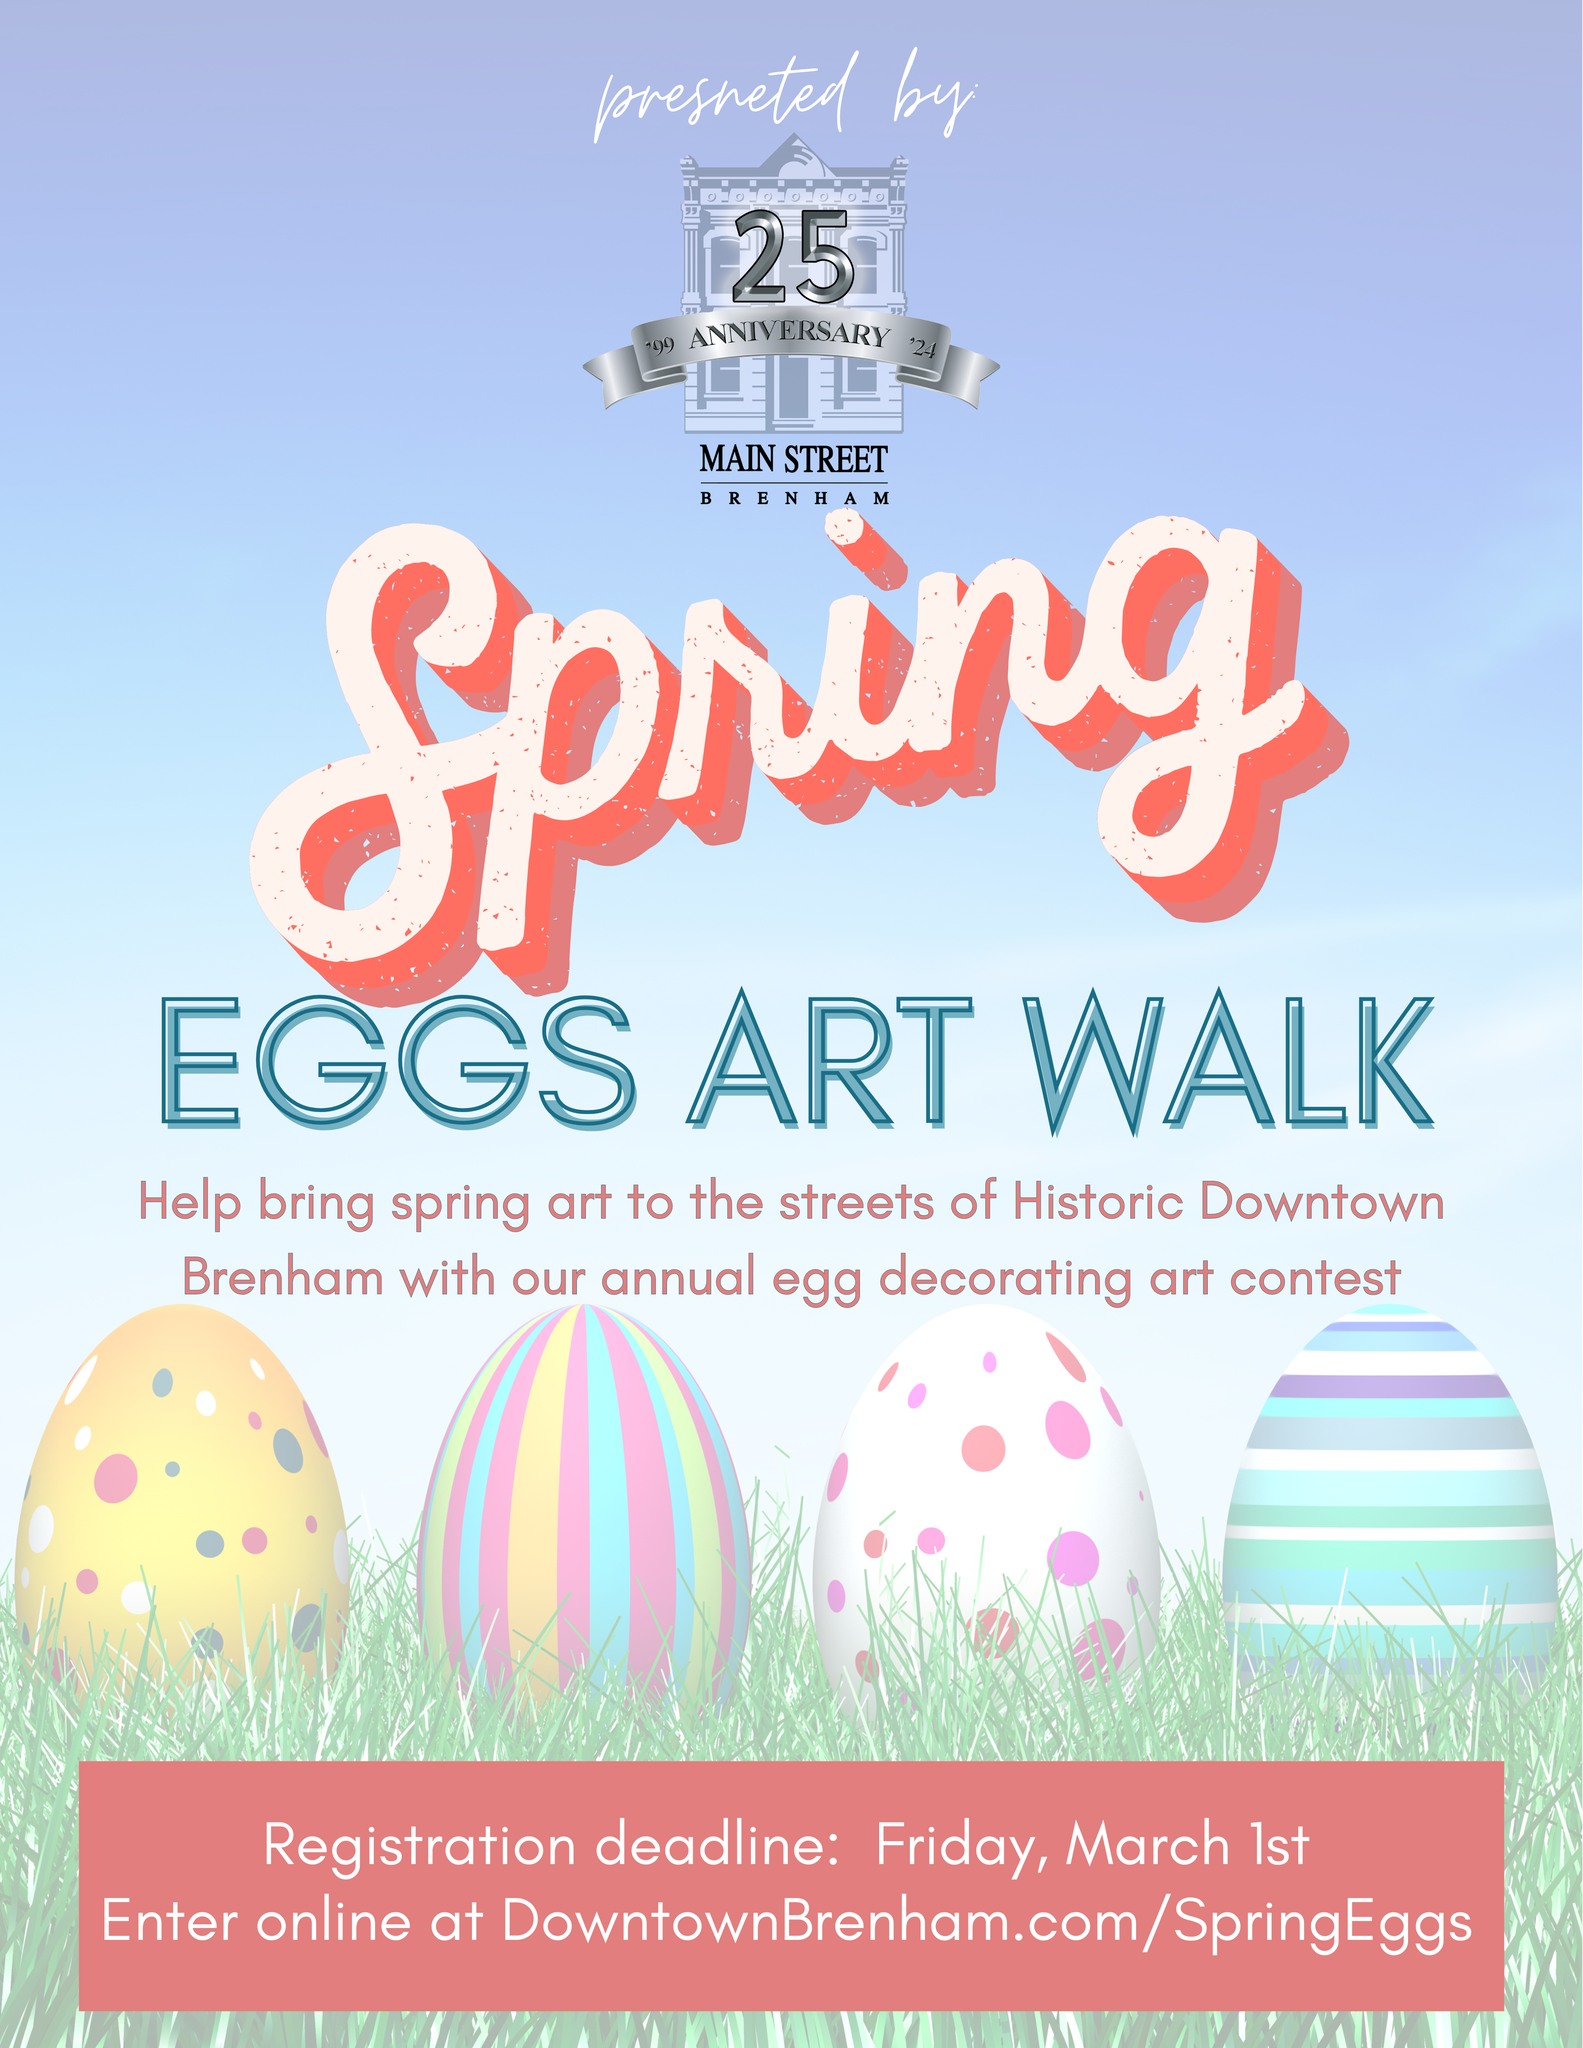 MAKE YOUR OWN EGG TO DISPLAY IN DOWNTOWN BRENHAM! CLICK TO REGISTER!